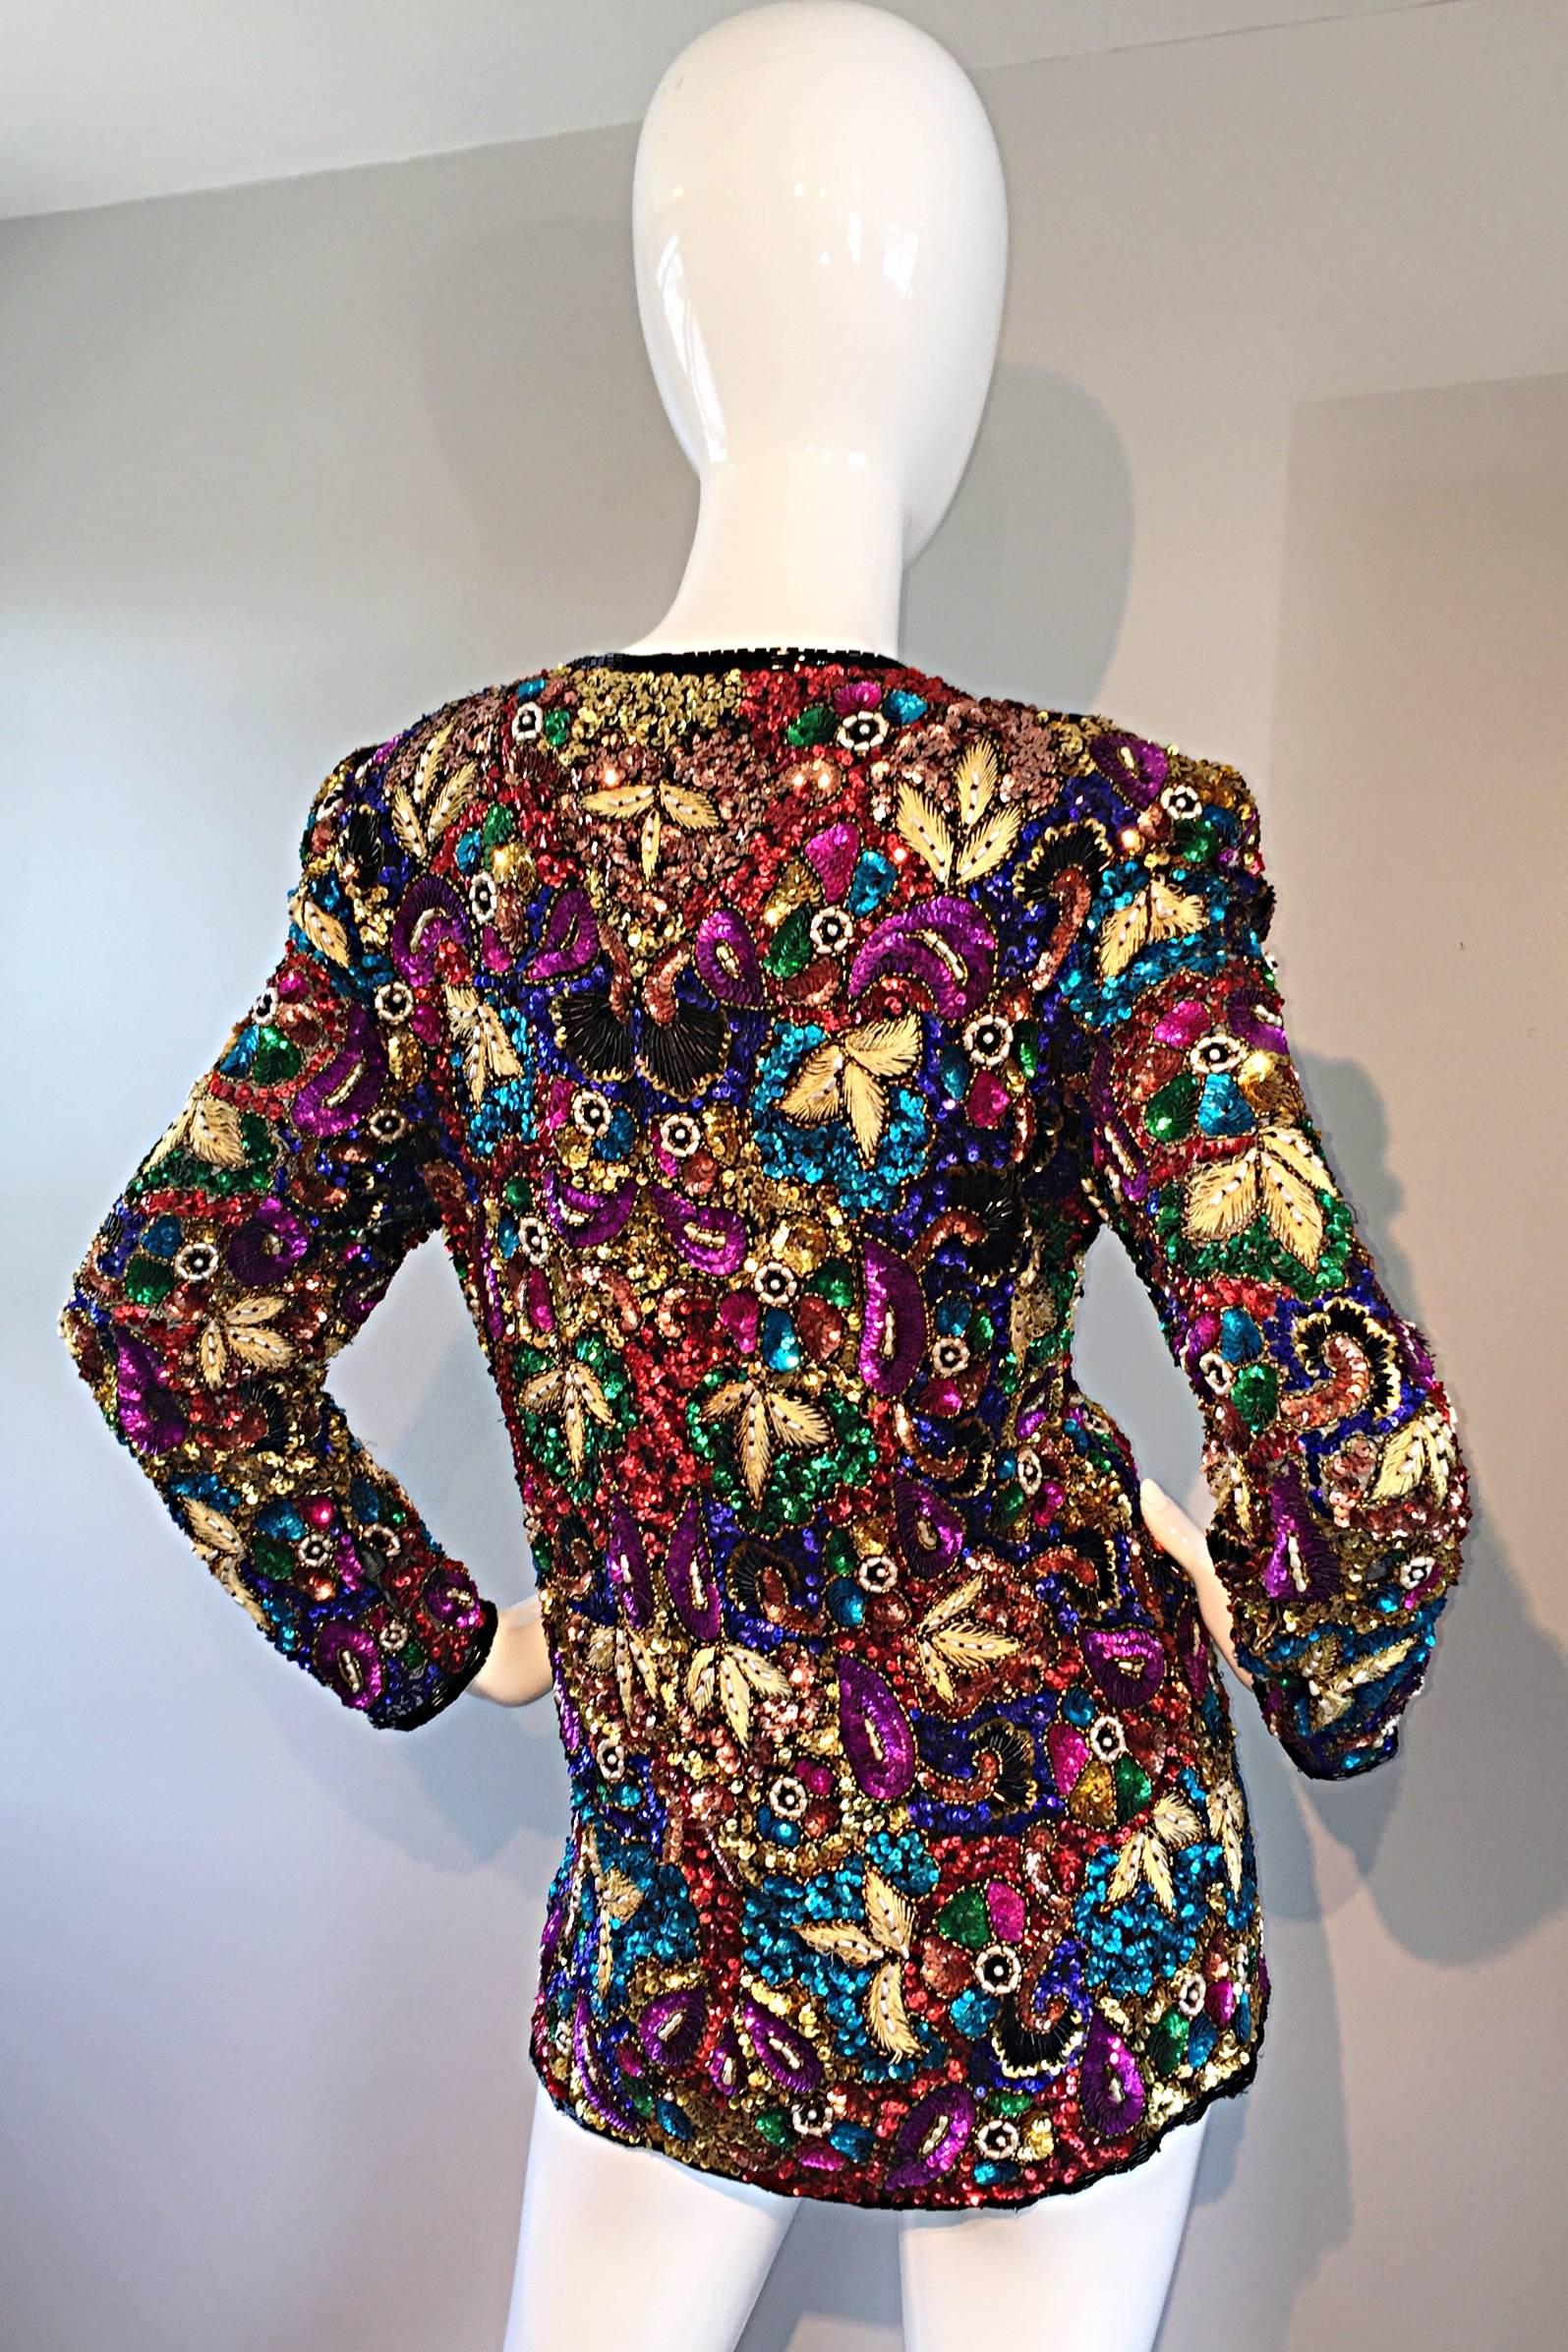 Spectacular Vintage Sequined and Beaded Silk Jacket All - Over Sequins For Sale 1